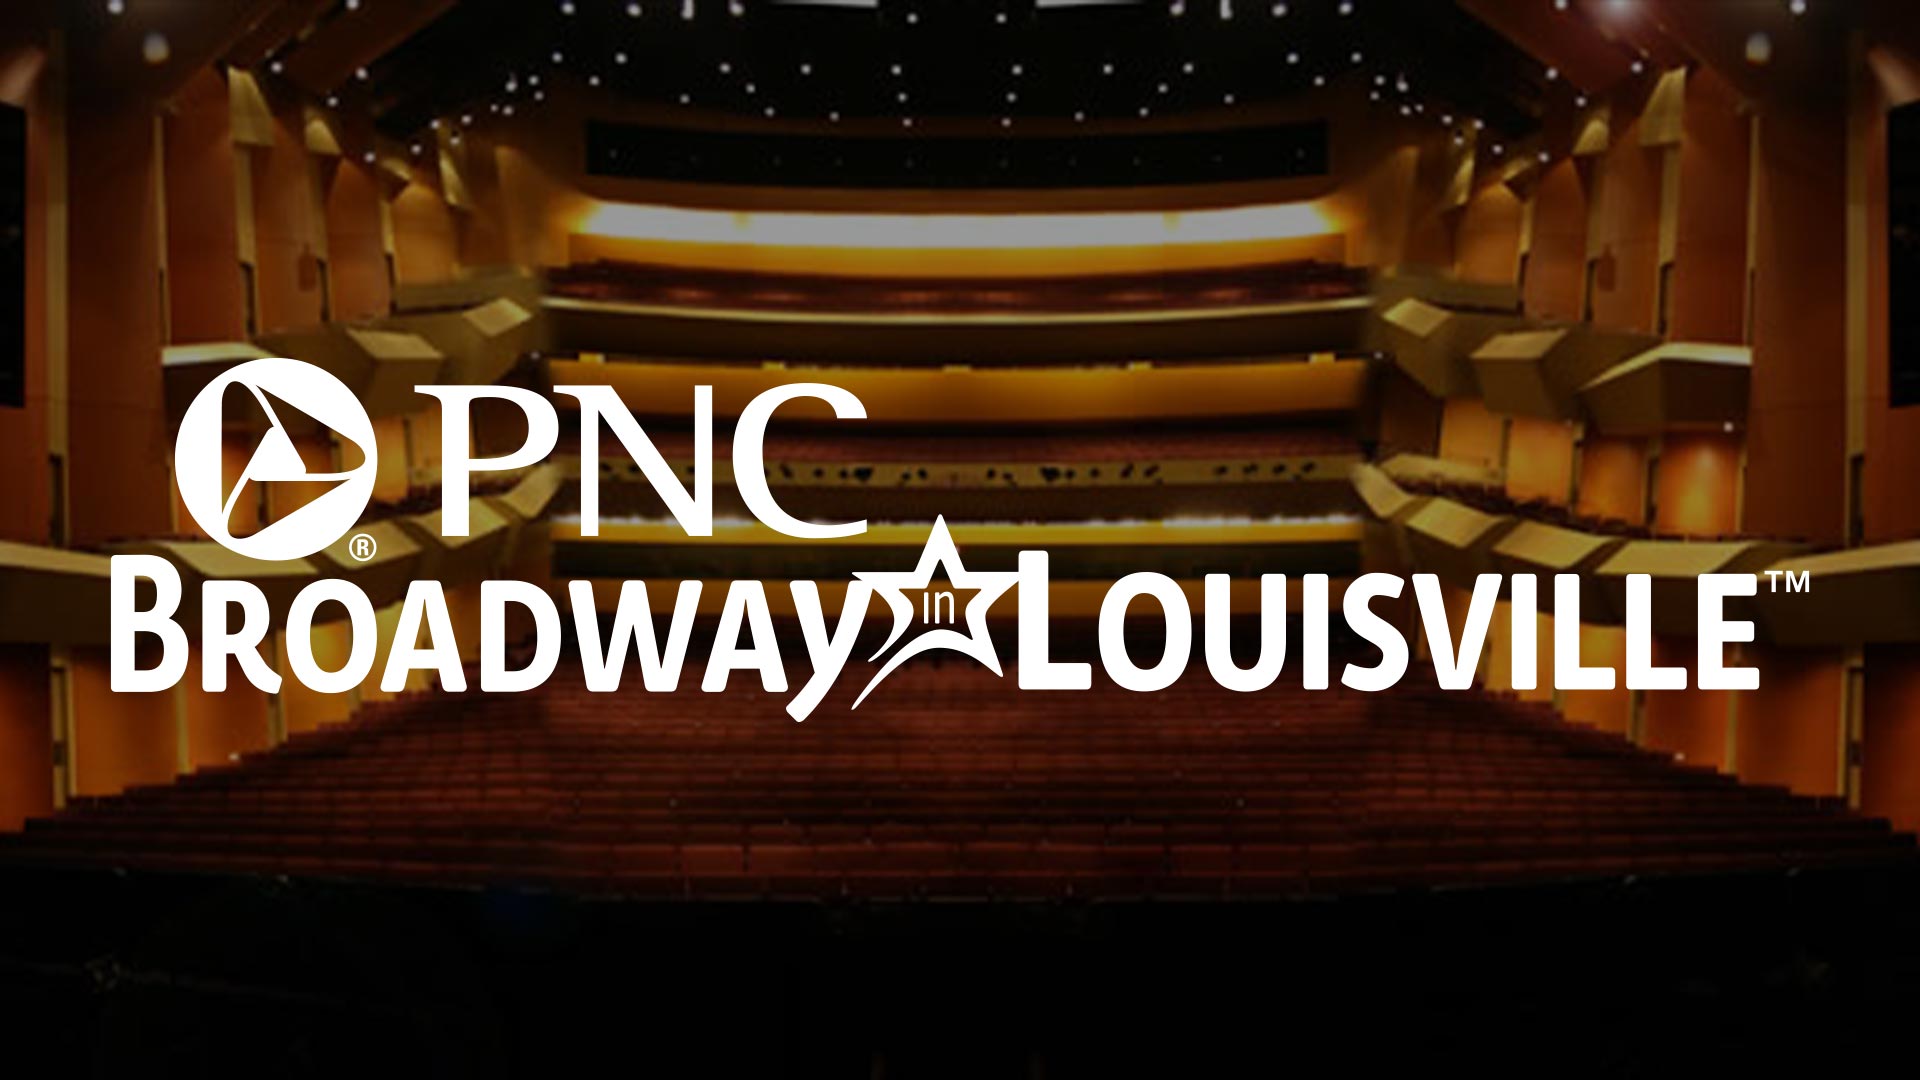 PNC Broadway in Louisville logo overlaid on a photo of Whitney Hall at the Kentucky Center